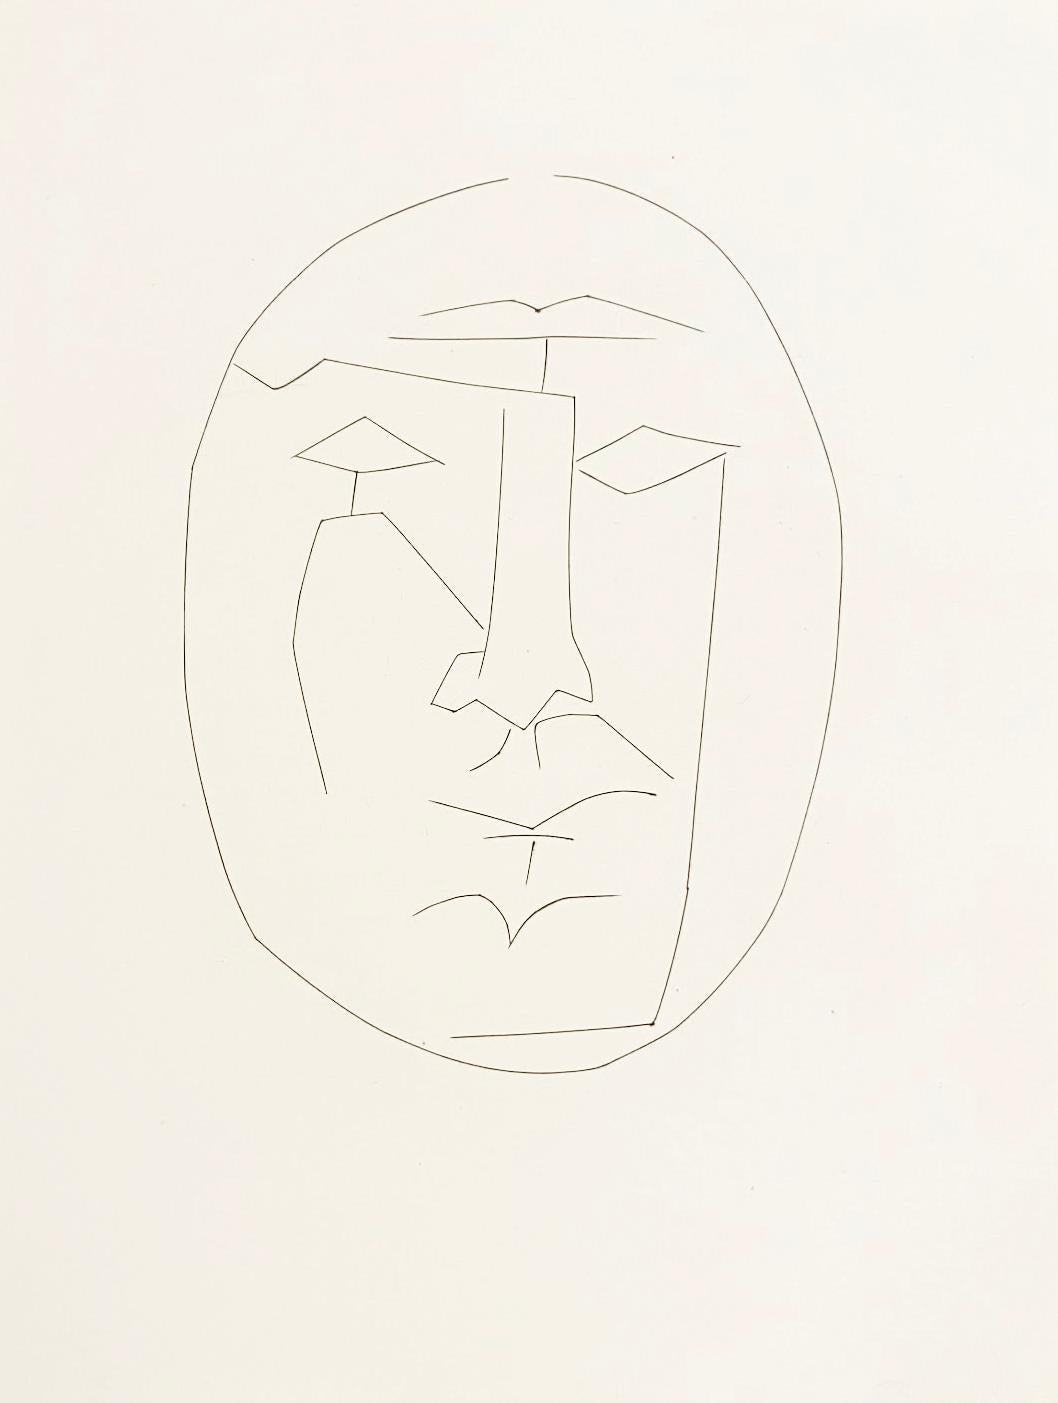 Pablo Picasso Portrait Print - Oval Head of Man Looking Straight (Plate XXIII), from Carmen